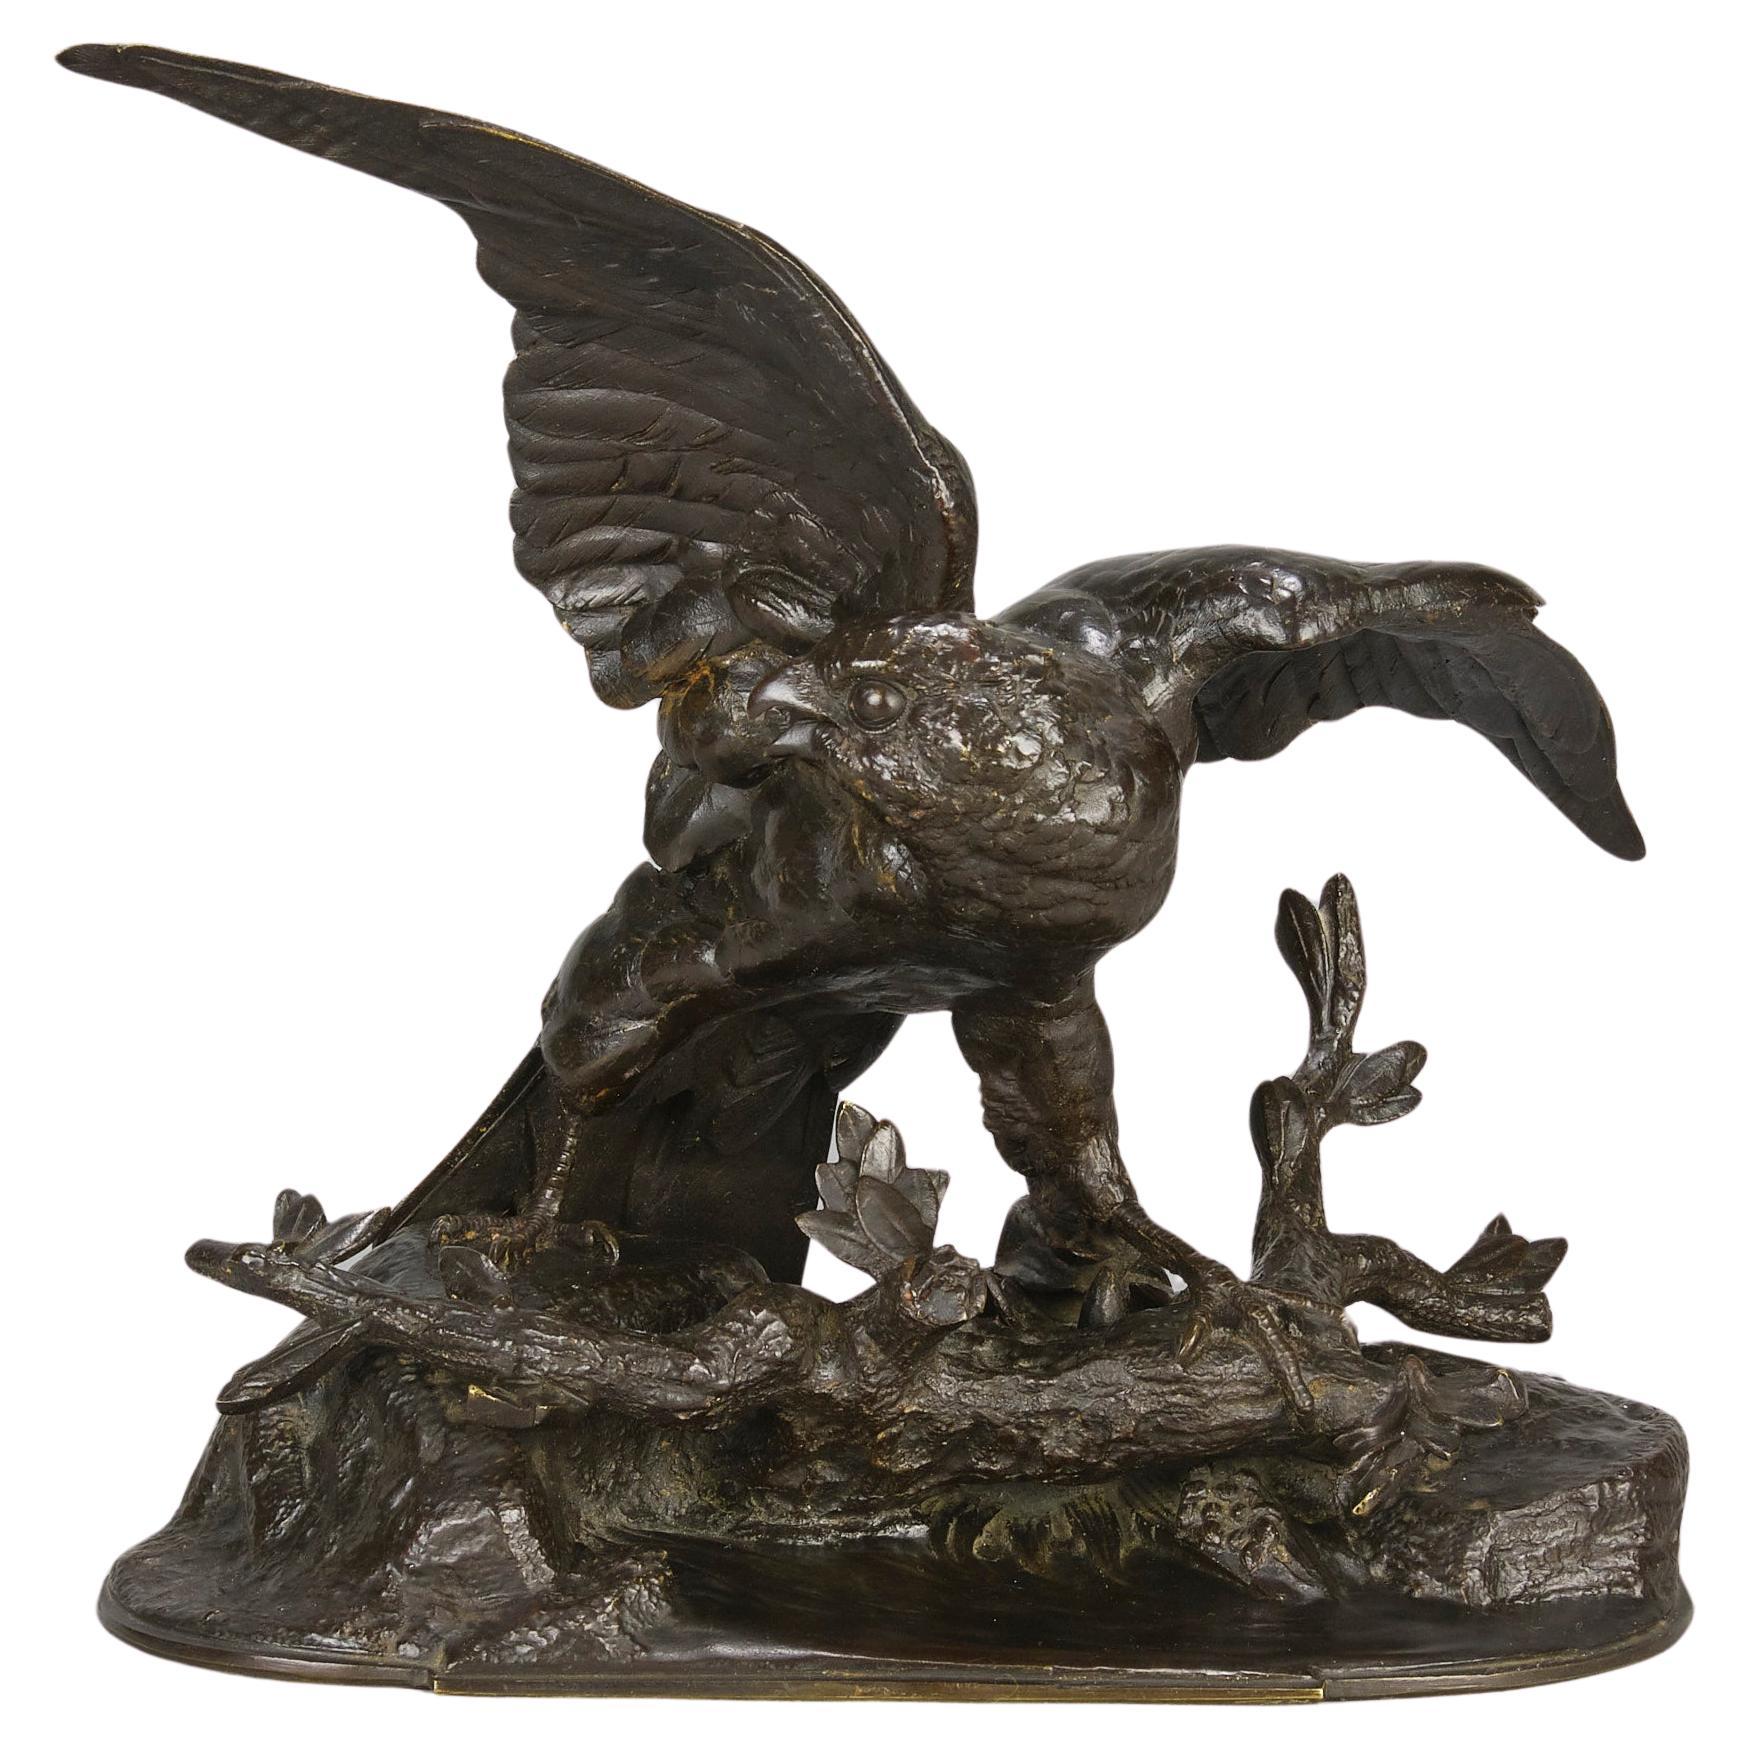 19th Century Animalier Bronze Sculpture entitled "Falcon" by Jules Moigniez